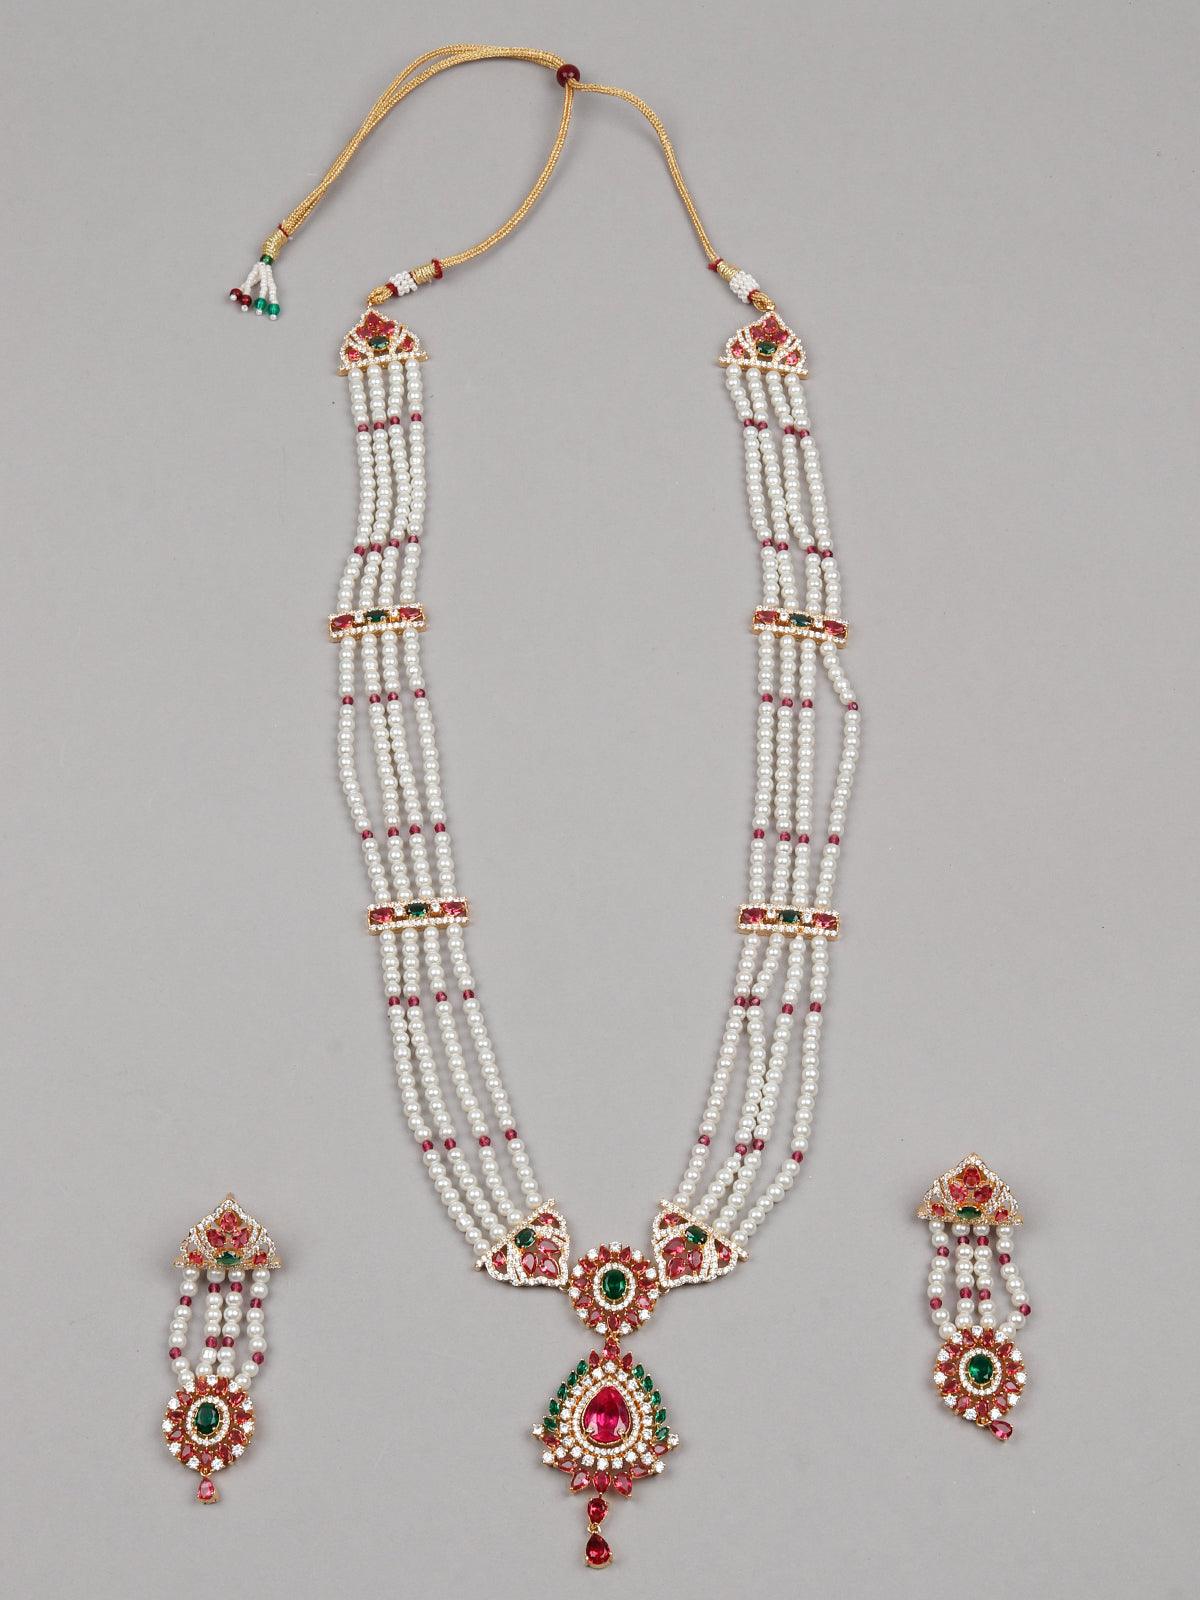 Mesmerizing Multi Layered Long Pearl Necklace - Odette